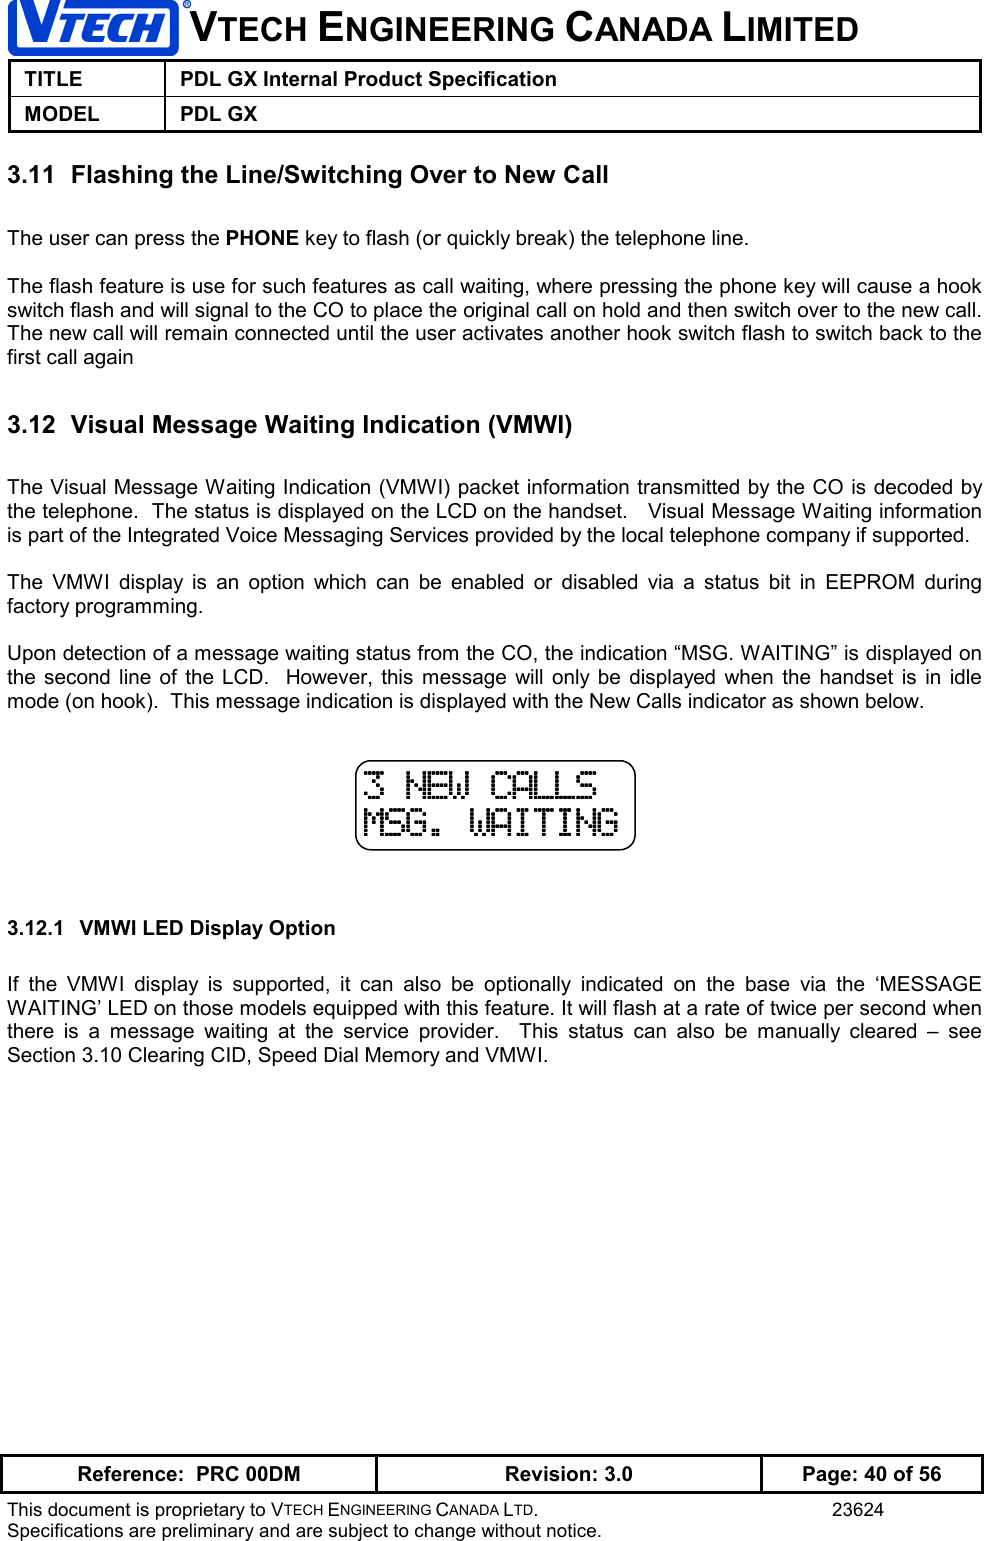 VTECH ENGINEERING CANADA LIMITEDTITLE PDL GX Internal Product SpecificationMODEL PDL GXReference:  PRC 00DM Revision: 3.0 Page: 40 of 56This document is proprietary to VTECH ENGINEERING CANADA LTD. 23624Specifications are preliminary and are subject to change without notice.3.11  Flashing the Line/Switching Over to New CallThe user can press the PHONE key to flash (or quickly break) the telephone line.The flash feature is use for such features as call waiting, where pressing the phone key will cause a hookswitch flash and will signal to the CO to place the original call on hold and then switch over to the new call.The new call will remain connected until the user activates another hook switch flash to switch back to thefirst call again3.12  Visual Message Waiting Indication (VMWI)The Visual Message Waiting Indication (VMWI) packet information transmitted by the CO is decoded bythe telephone.  The status is displayed on the LCD on the handset.   Visual Message Waiting informationis part of the Integrated Voice Messaging Services provided by the local telephone company if supported.The VMWI display is an option which can be enabled or disabled via a status bit in EEPROM duringfactory programming.Upon detection of a message waiting status from the CO, the indication “MSG. WAITING” is displayed onthe second line of the LCD.  However, this message will only be displayed when the handset is in idlemode (on hook).  This message indication is displayed with the New Calls indicator as shown below.3.12.1  VMWI LED Display OptionIf the VMWI display is supported, it can also be optionally indicated on the base via the ‘MESSAGEWAITING’ LED on those models equipped with this feature. It will flash at a rate of twice per second whenthere is a message waiting at the service provider.  This status can also be manually cleared – seeSection 3.10 Clearing CID, Speed Dial Memory and VMWI.3 NEW CALLS3 NEW CALLS3 NEW CALLS3 NEW CALLSMSG. WAITINGMSG. WAITINGMSG. WAITINGMSG. WAITING